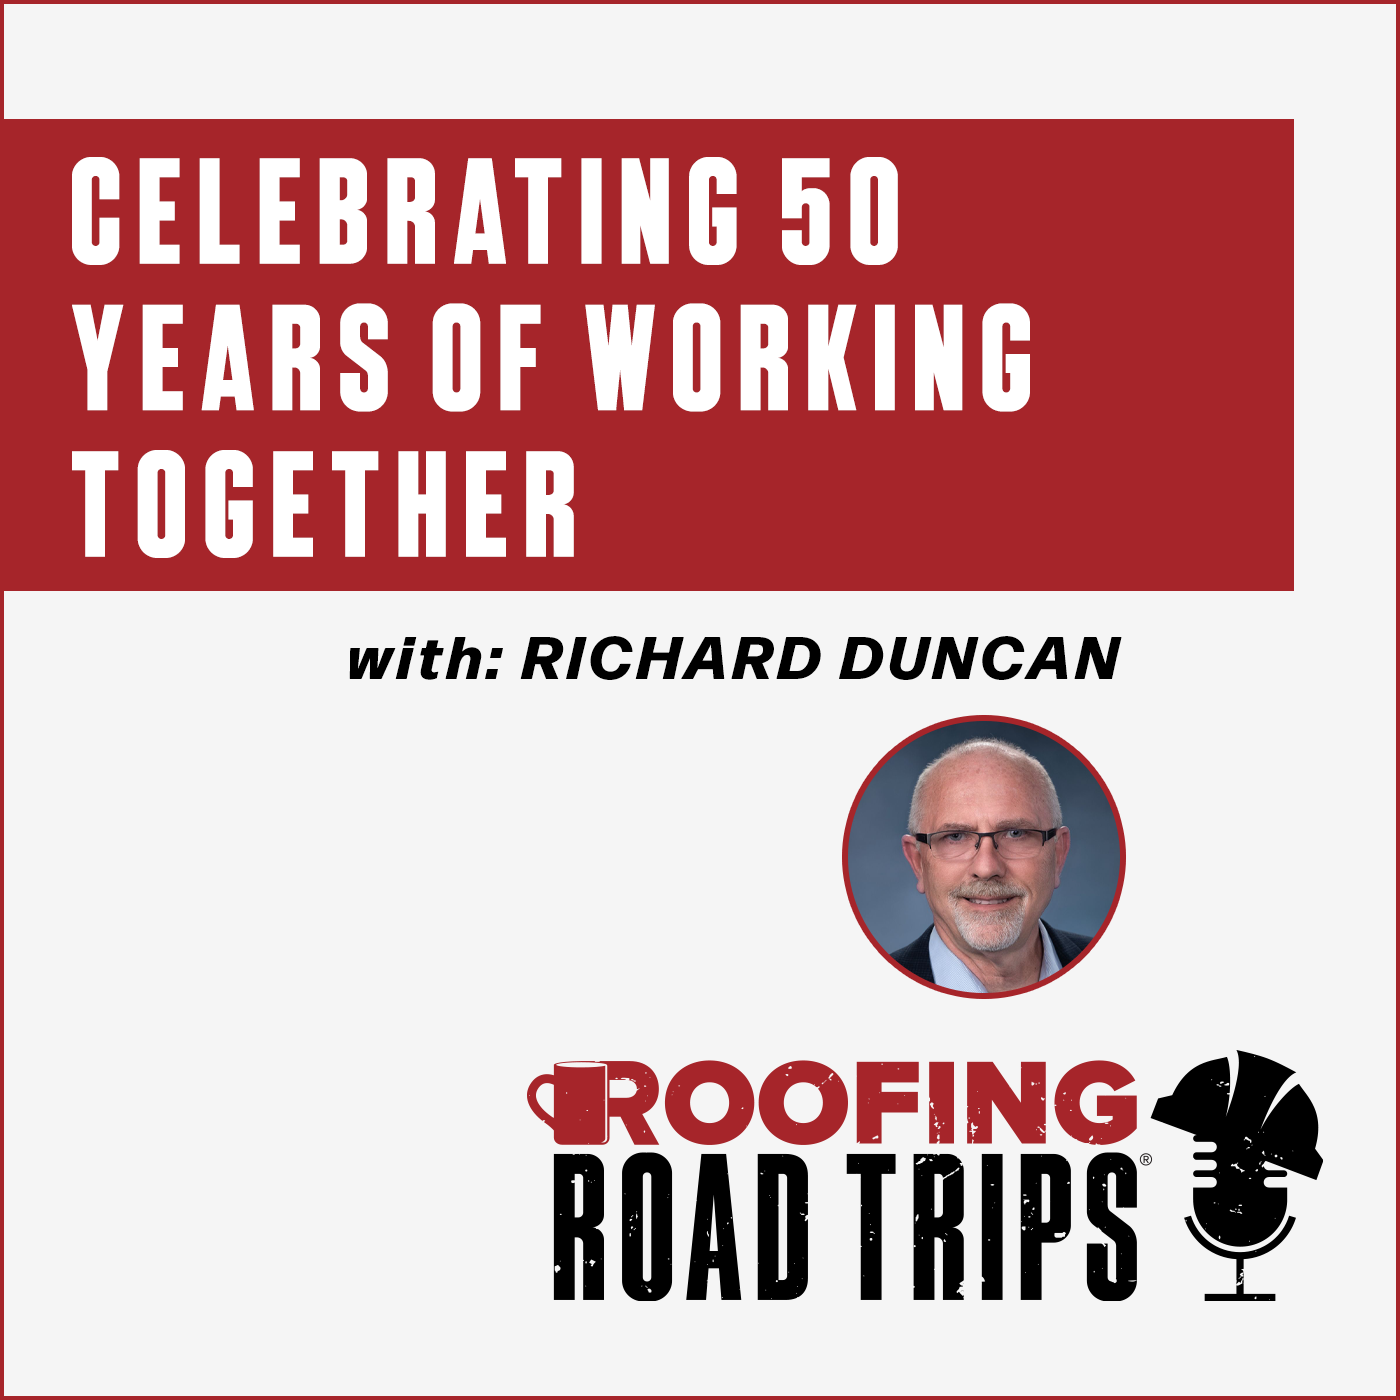 Richard Duncan - Celebrating 50 Years of Working Together